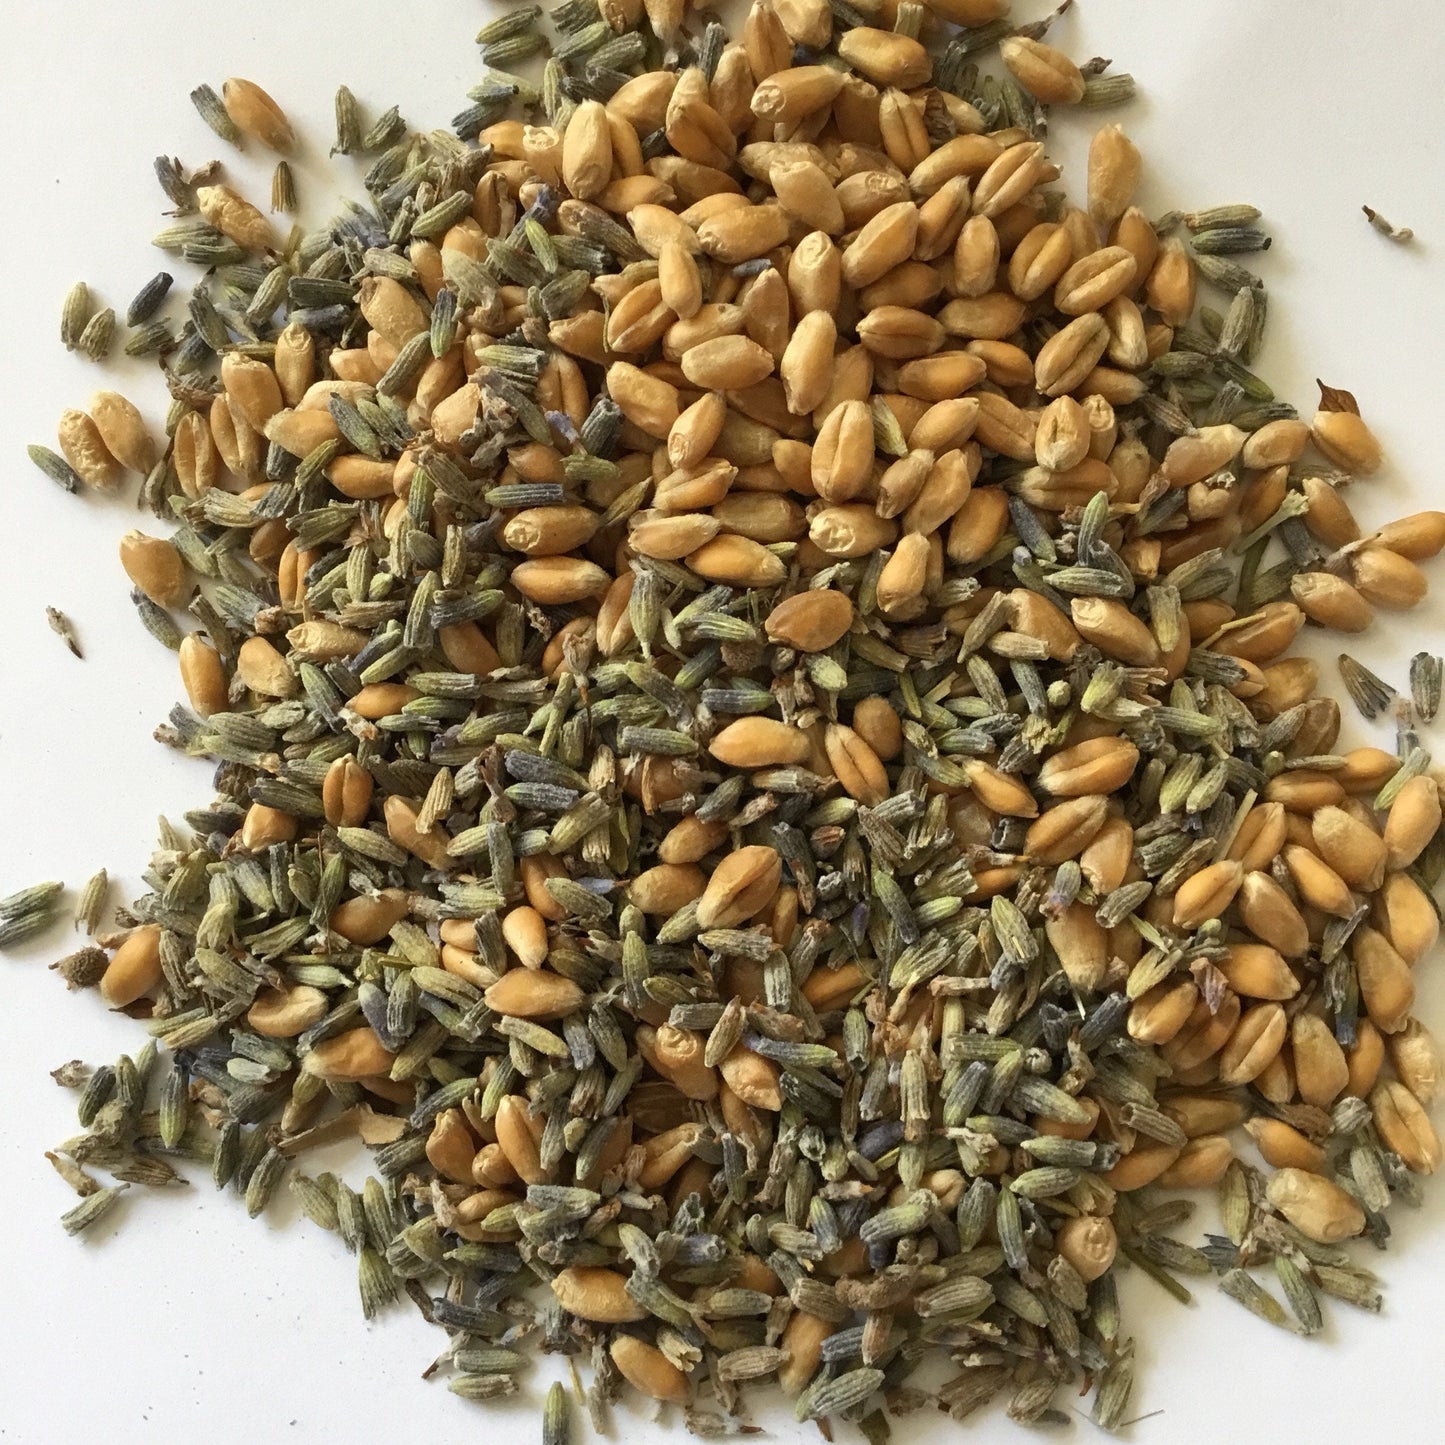 Ingredients for lavender wheat bags for comfort and relaxation. 